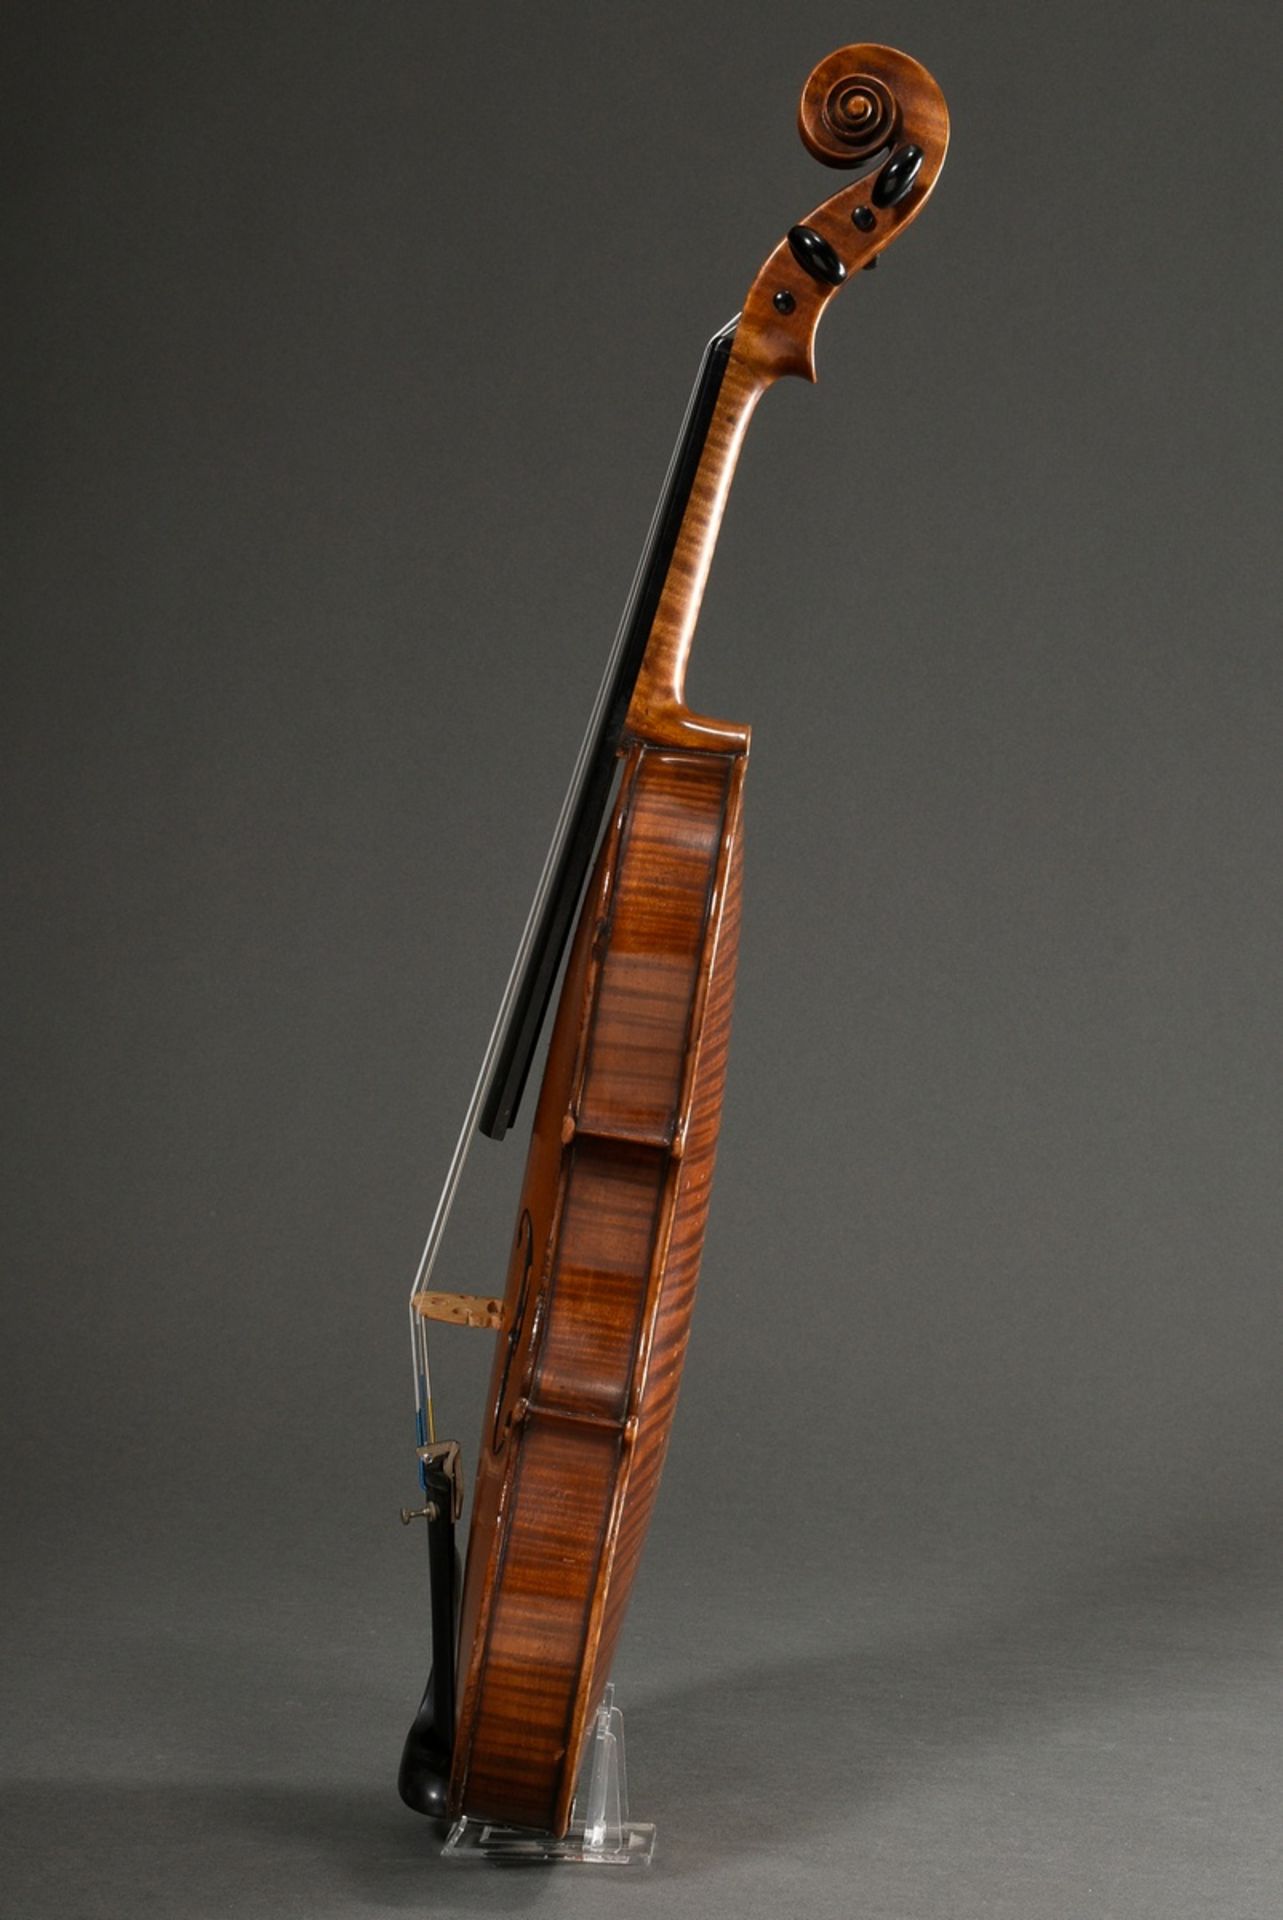 Elegant violin after Maggini, German 19th c., fine-grained spruce top, two-piece beautifully flamed - Image 5 of 16